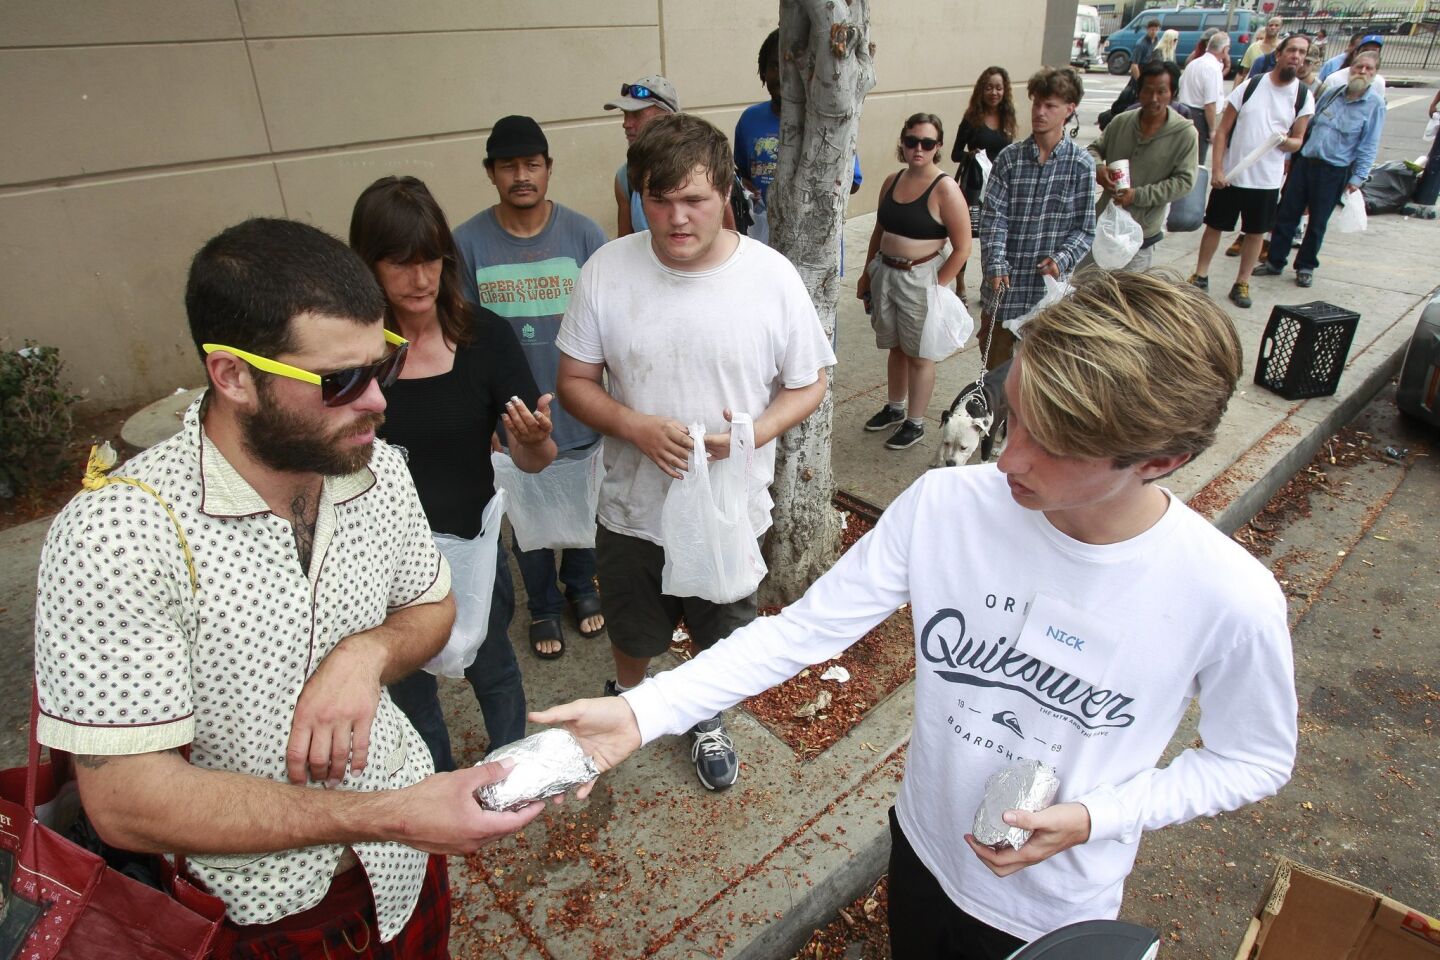 Burrito Boyz member Nick Peelman,18, hands egg burritos out to people, most of them homeless, in downtown San Diego.